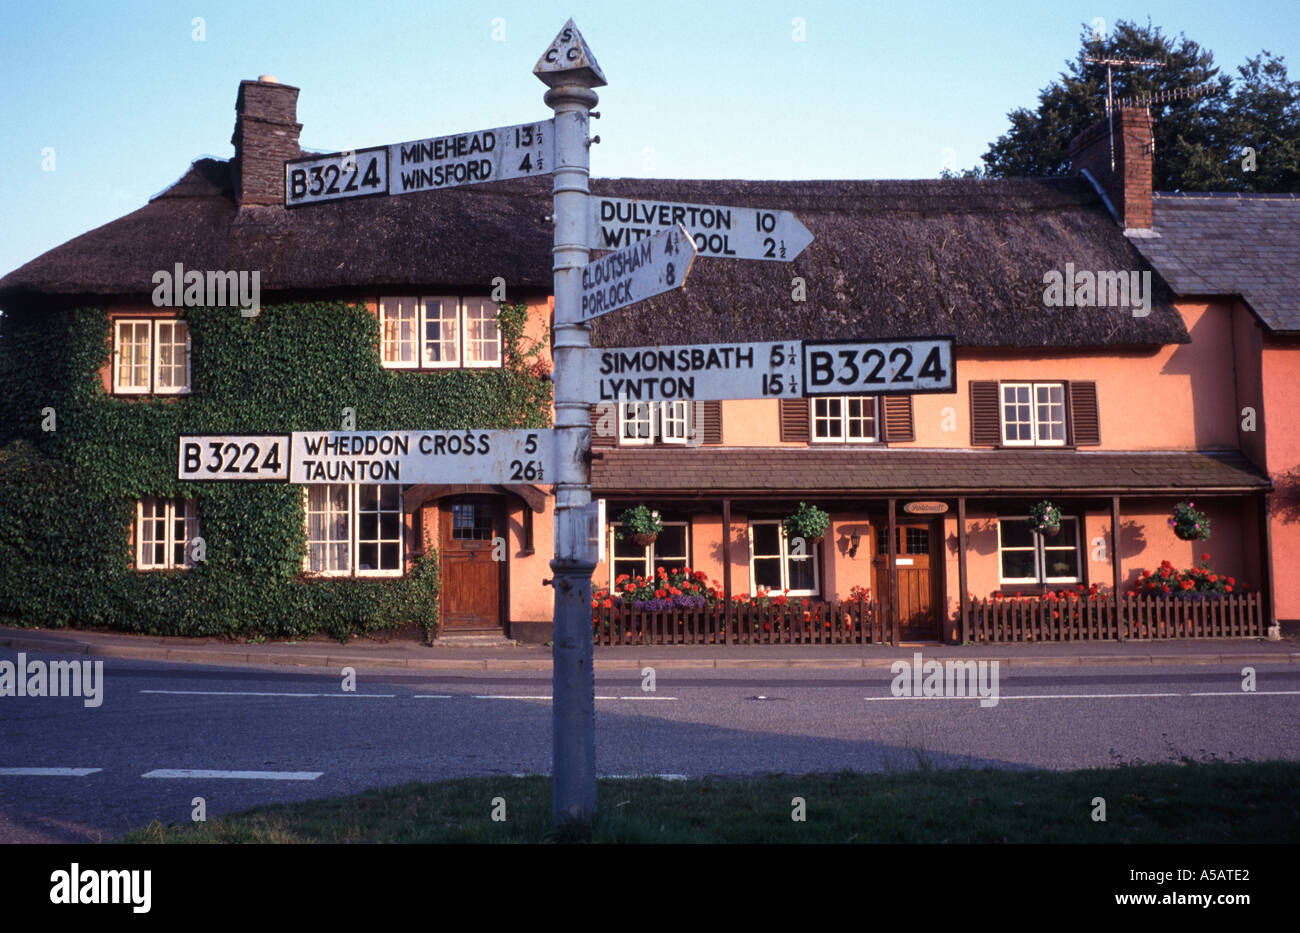 Signpost and thatched cottages in evening sunshine at the Exmoor village of Exford, Somerset, England Stock Photo